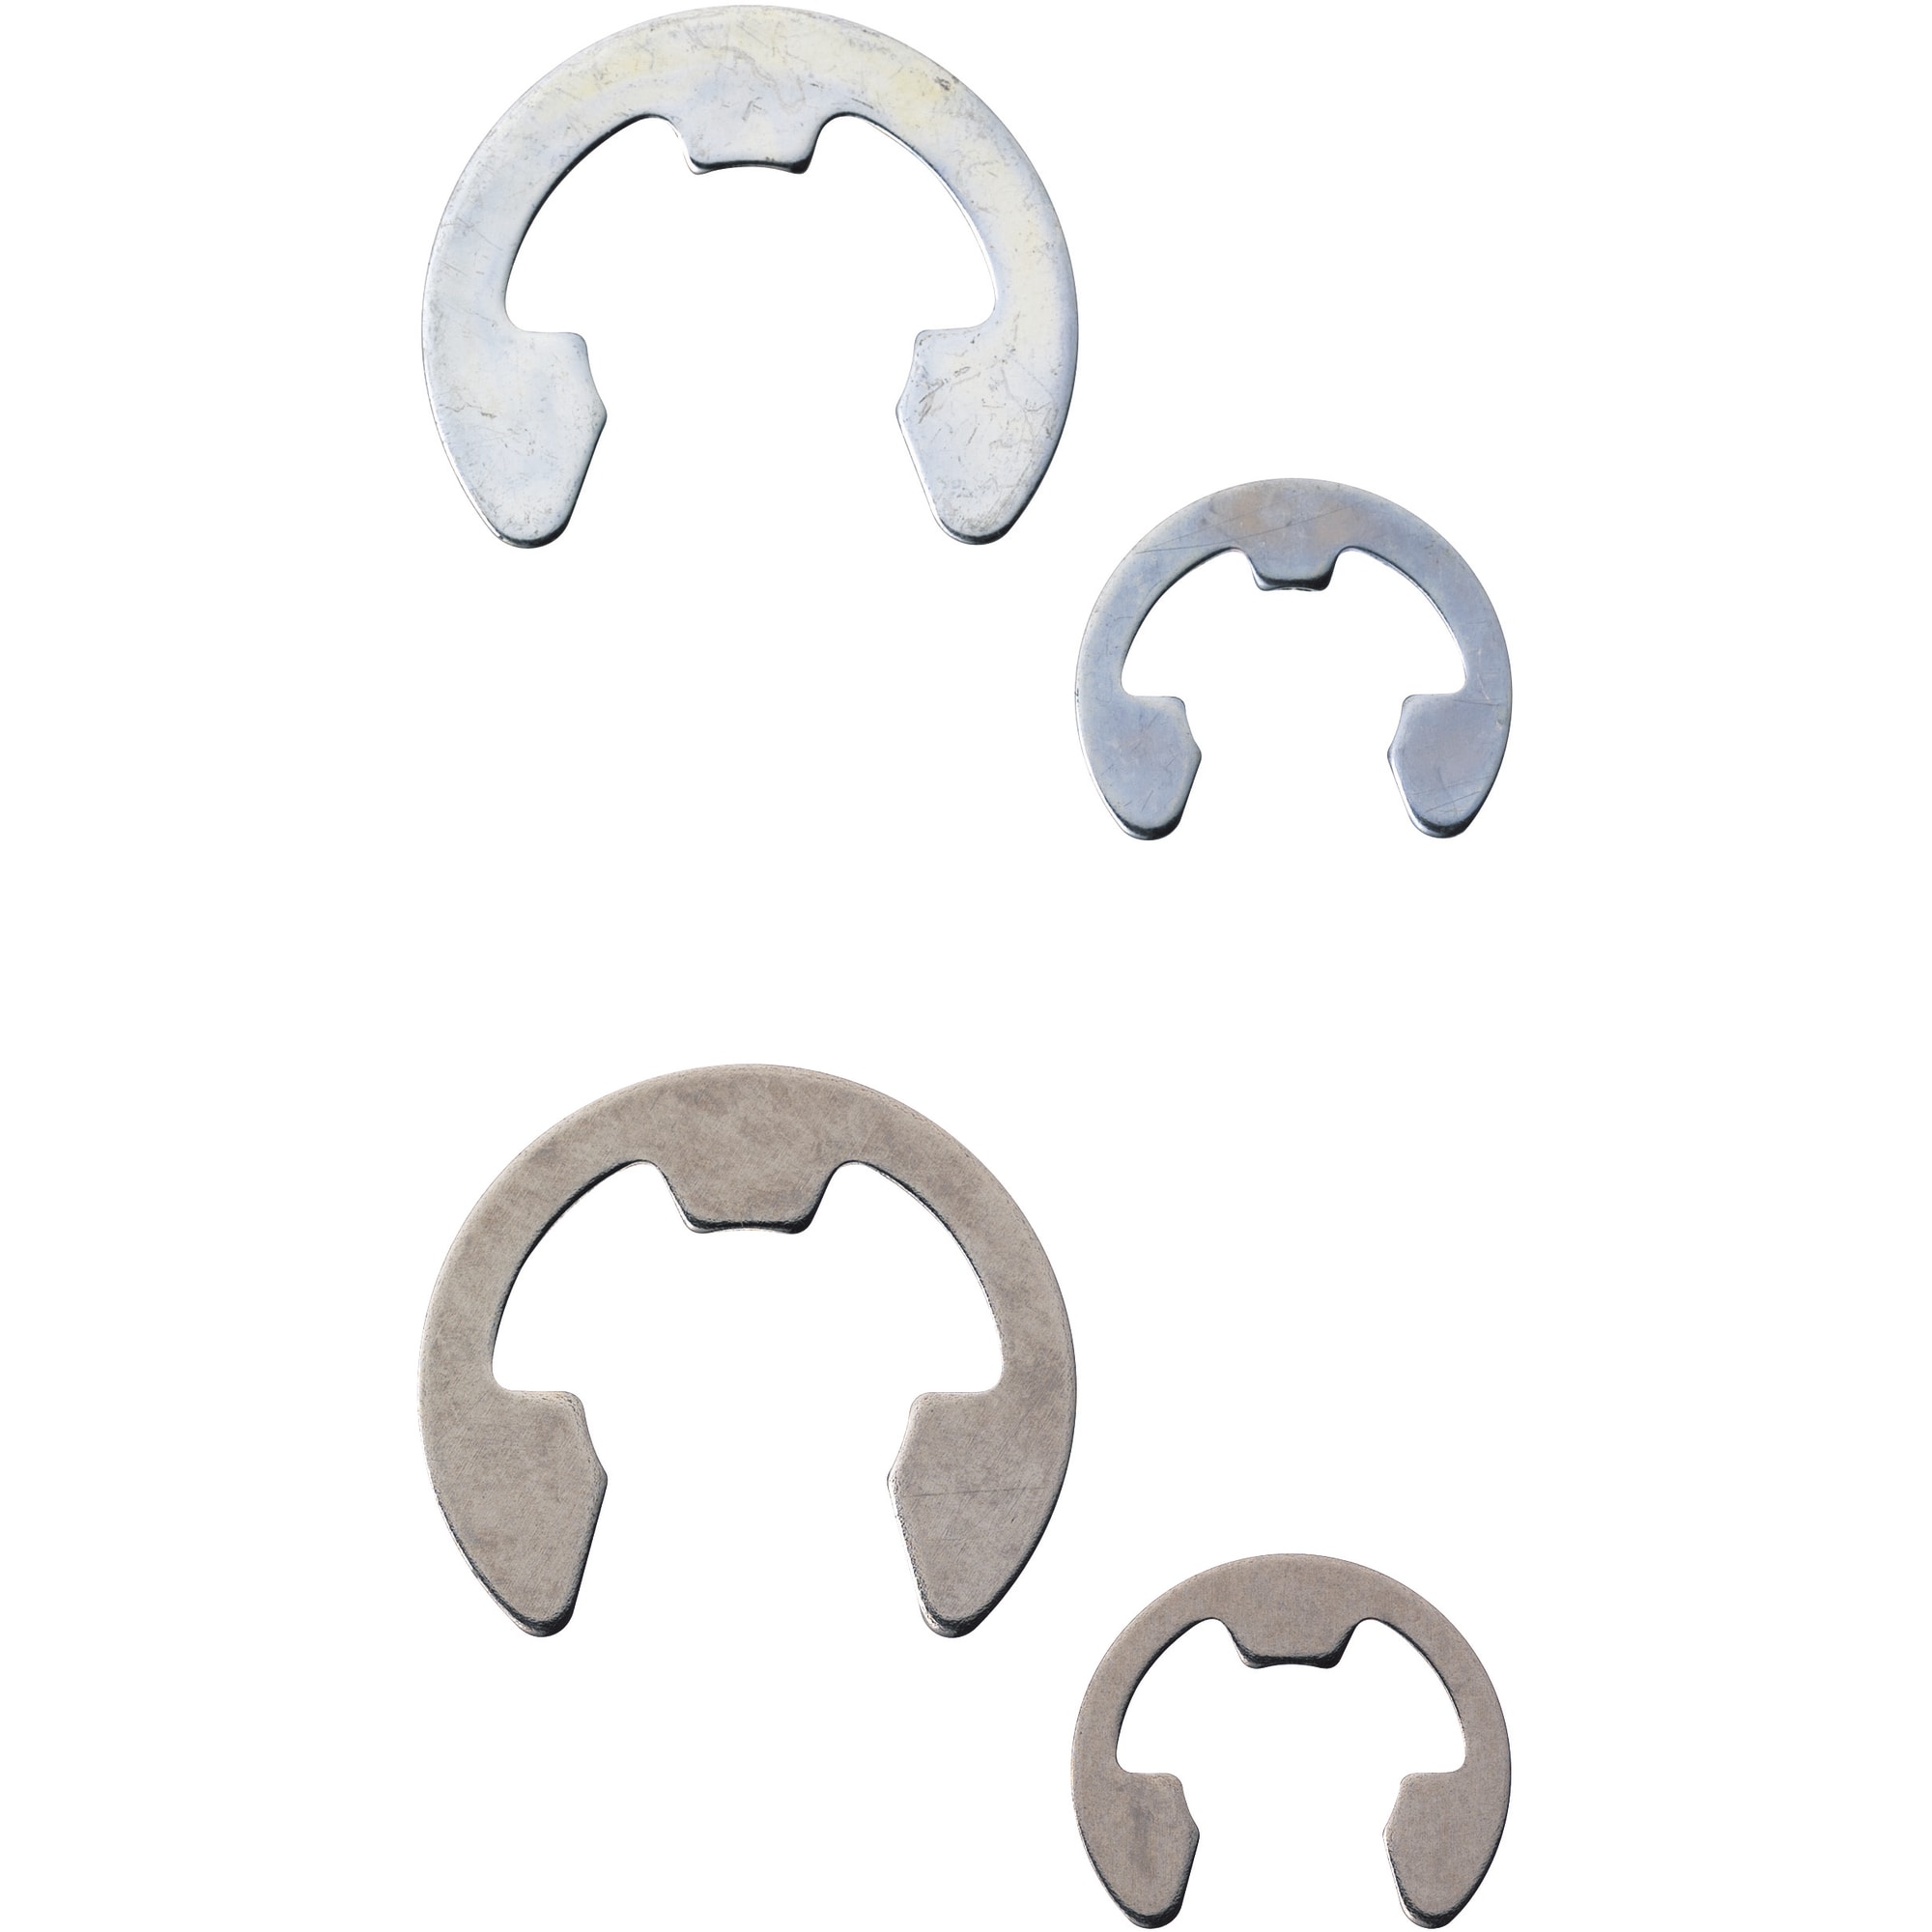 Circlip Design Collection, C-Clip, Seeger Ring, Snap Ring